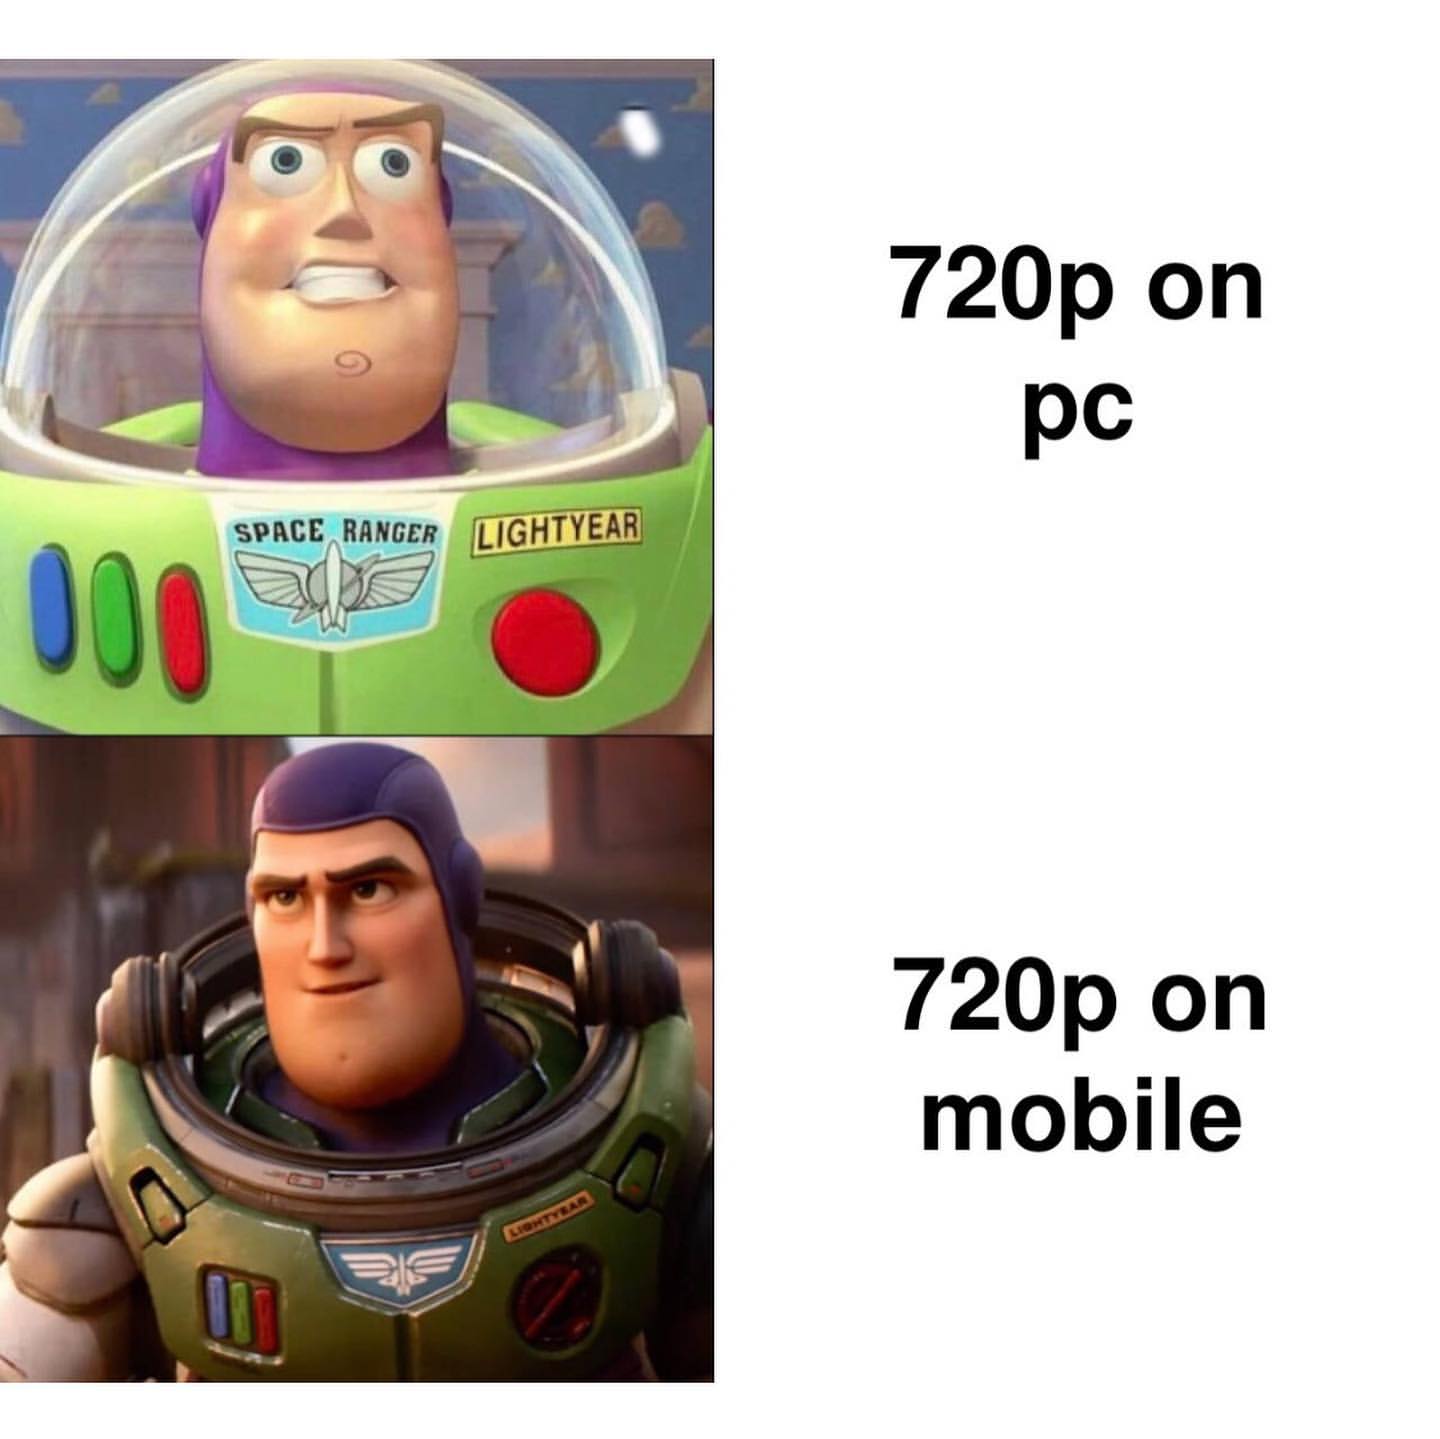 720p on pc. 720p on mobile.